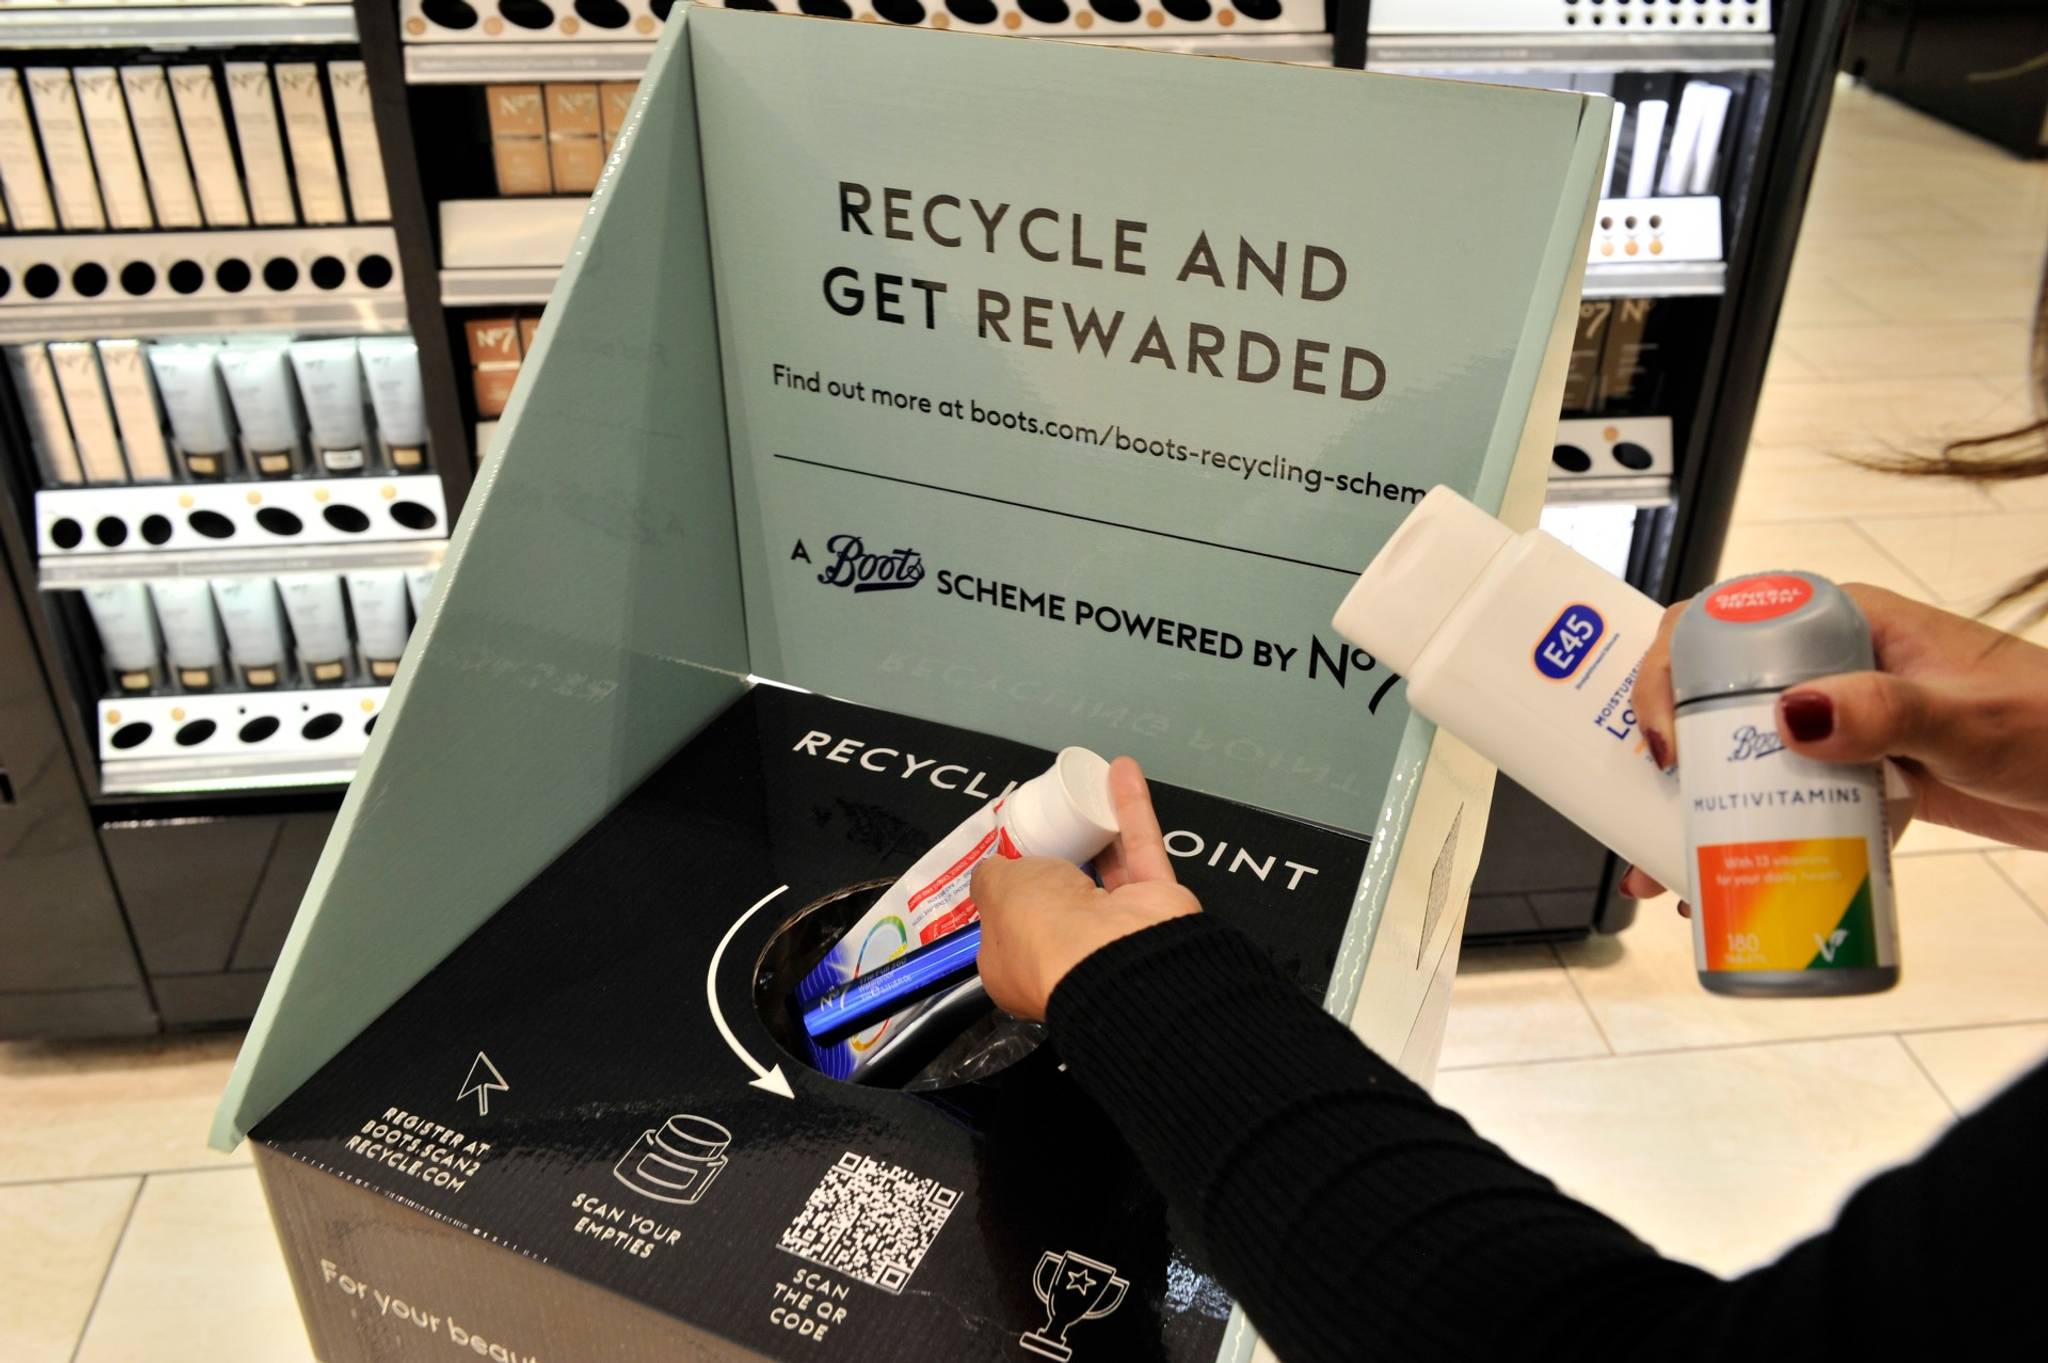 Boots rewards recyclers with loyalty scheme points